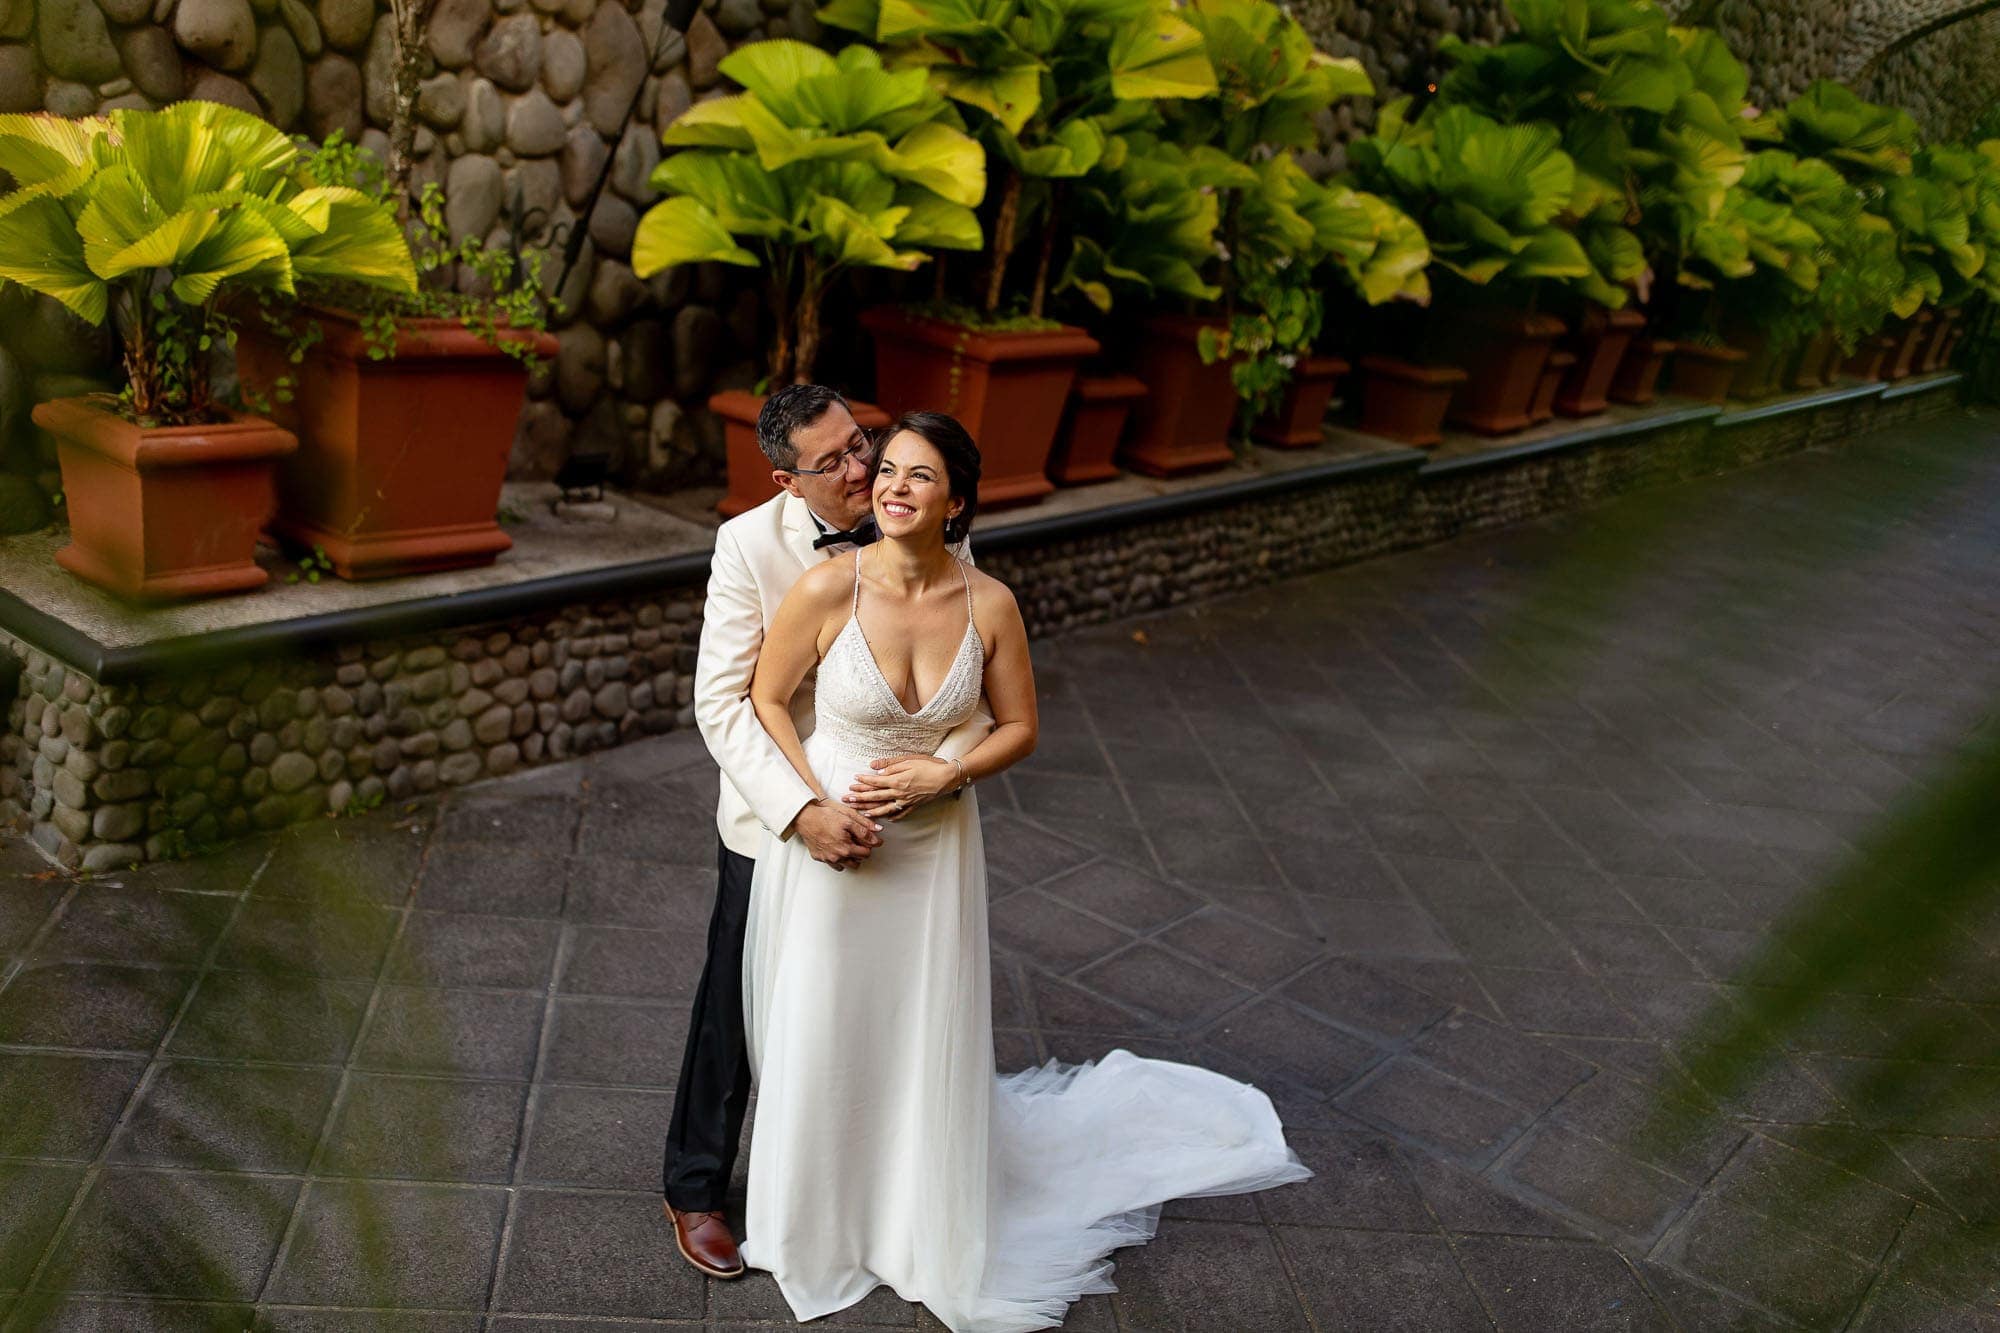 Bridal portraits for a classy wedding at Zephyr Palace